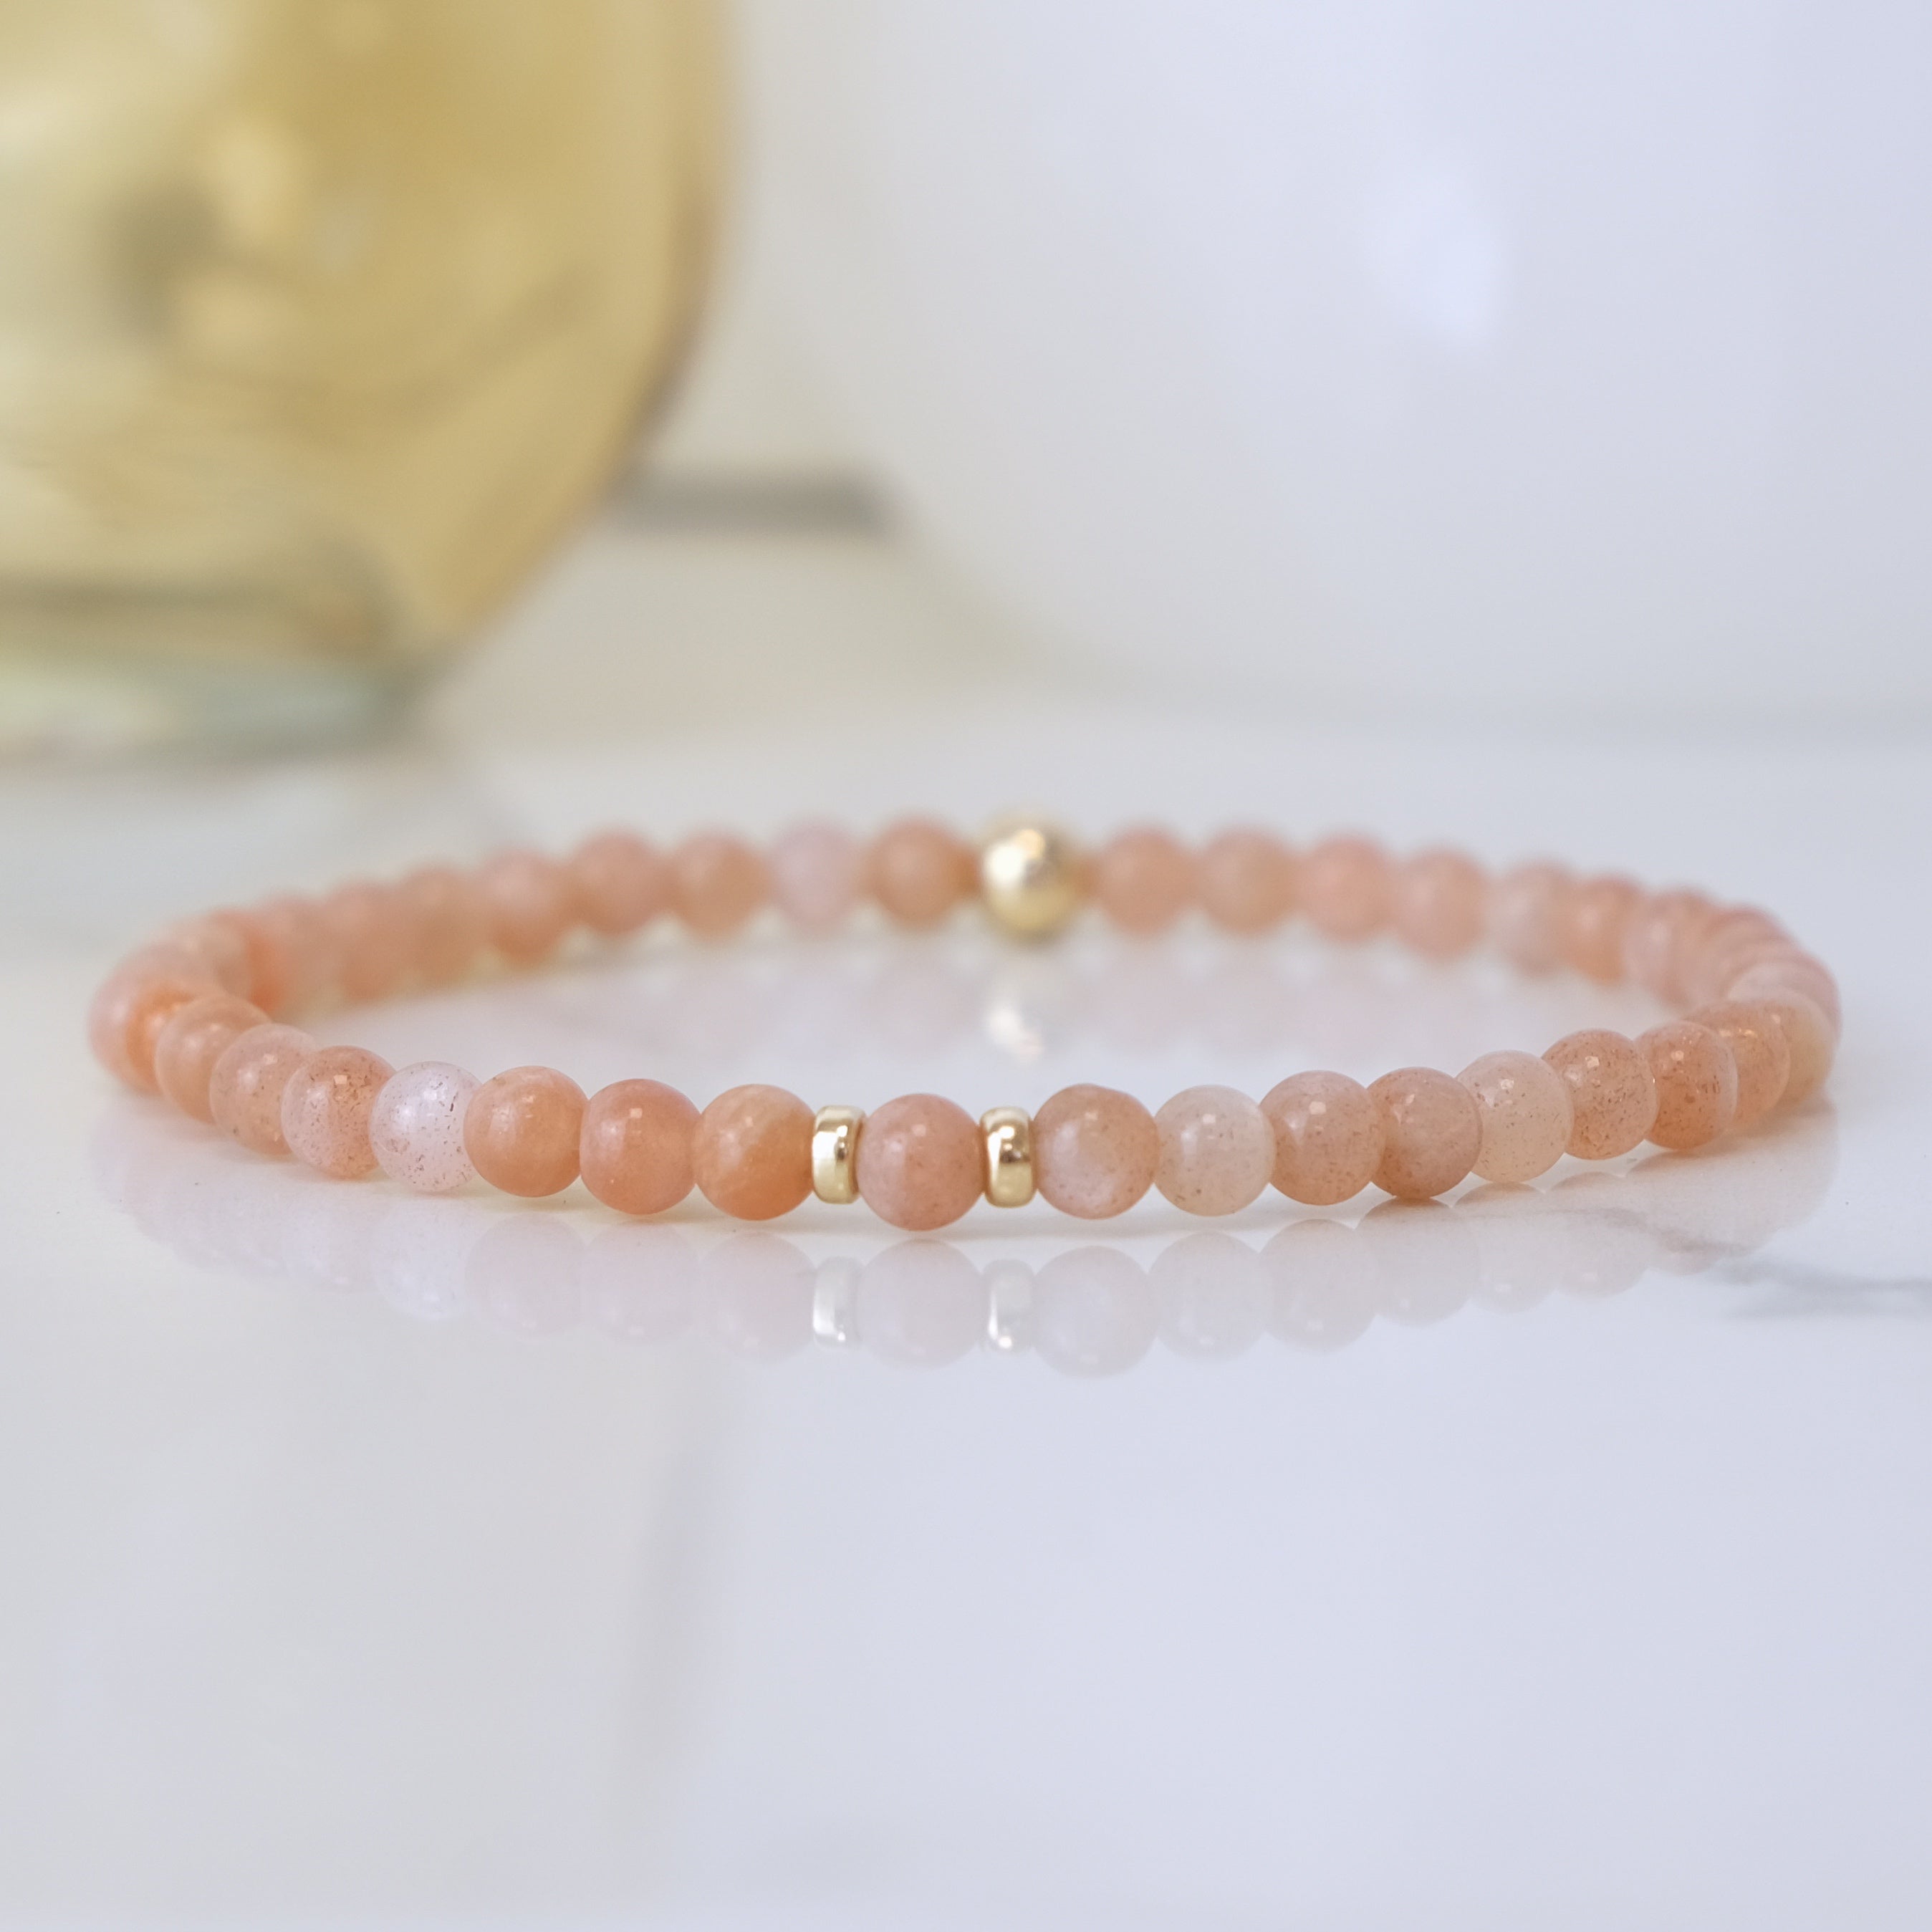 Sunstone gemstone bracelet in 4mm beads with Gold accents 